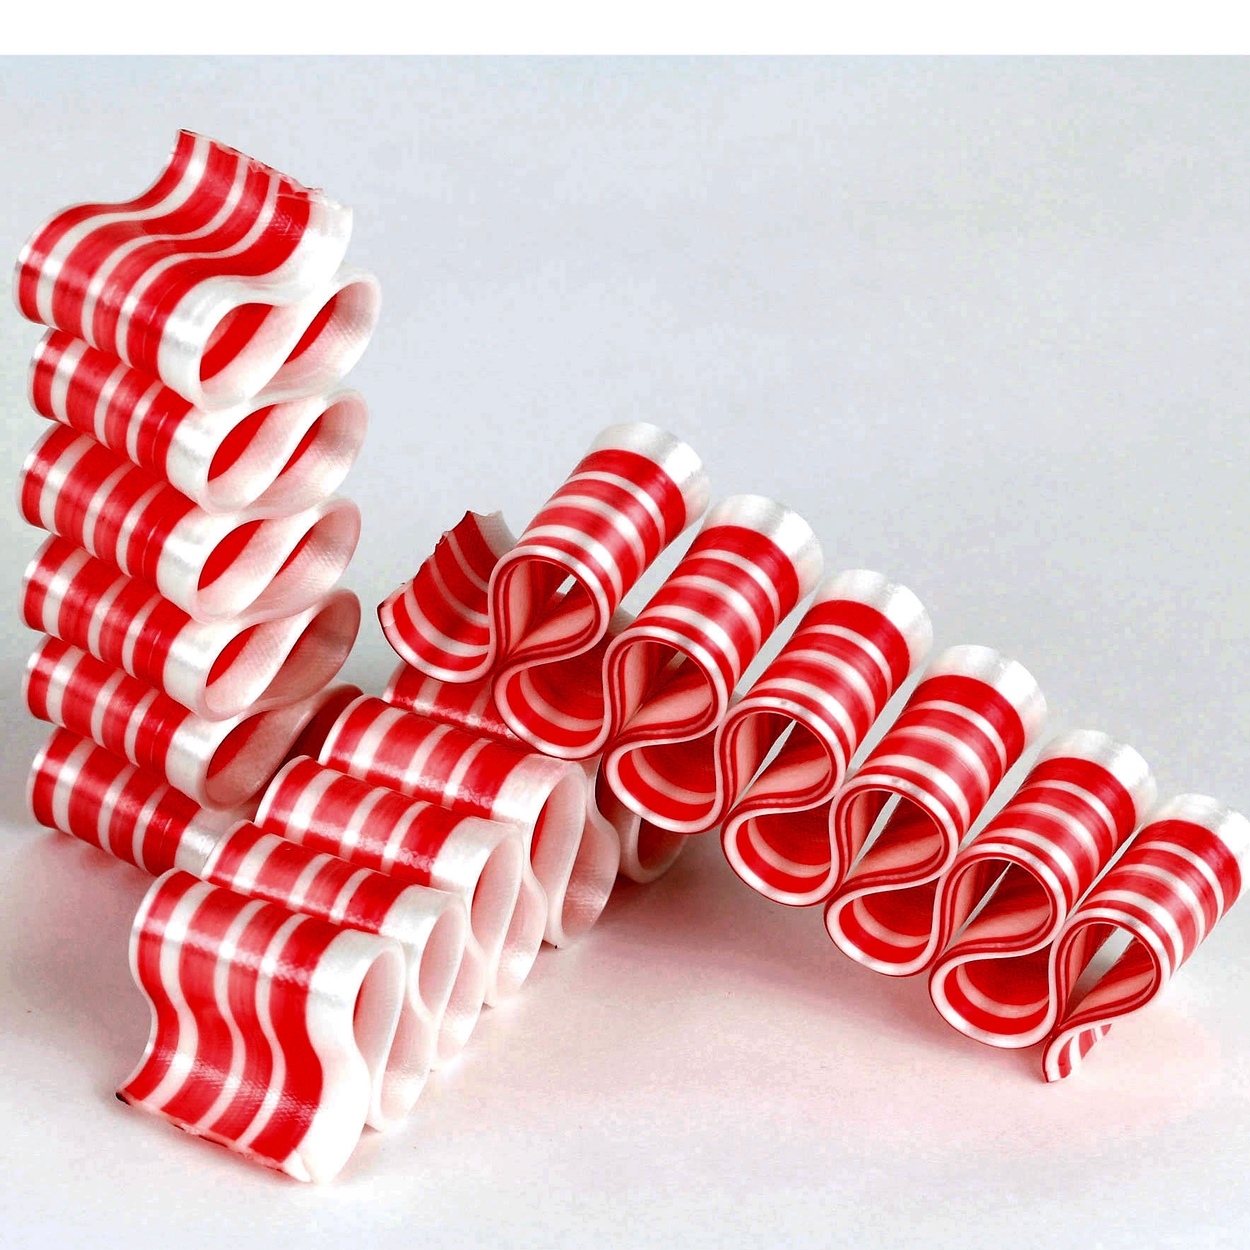 Old Fashioned Red & White Thin Candy Ribbon - 6CT Box • Old